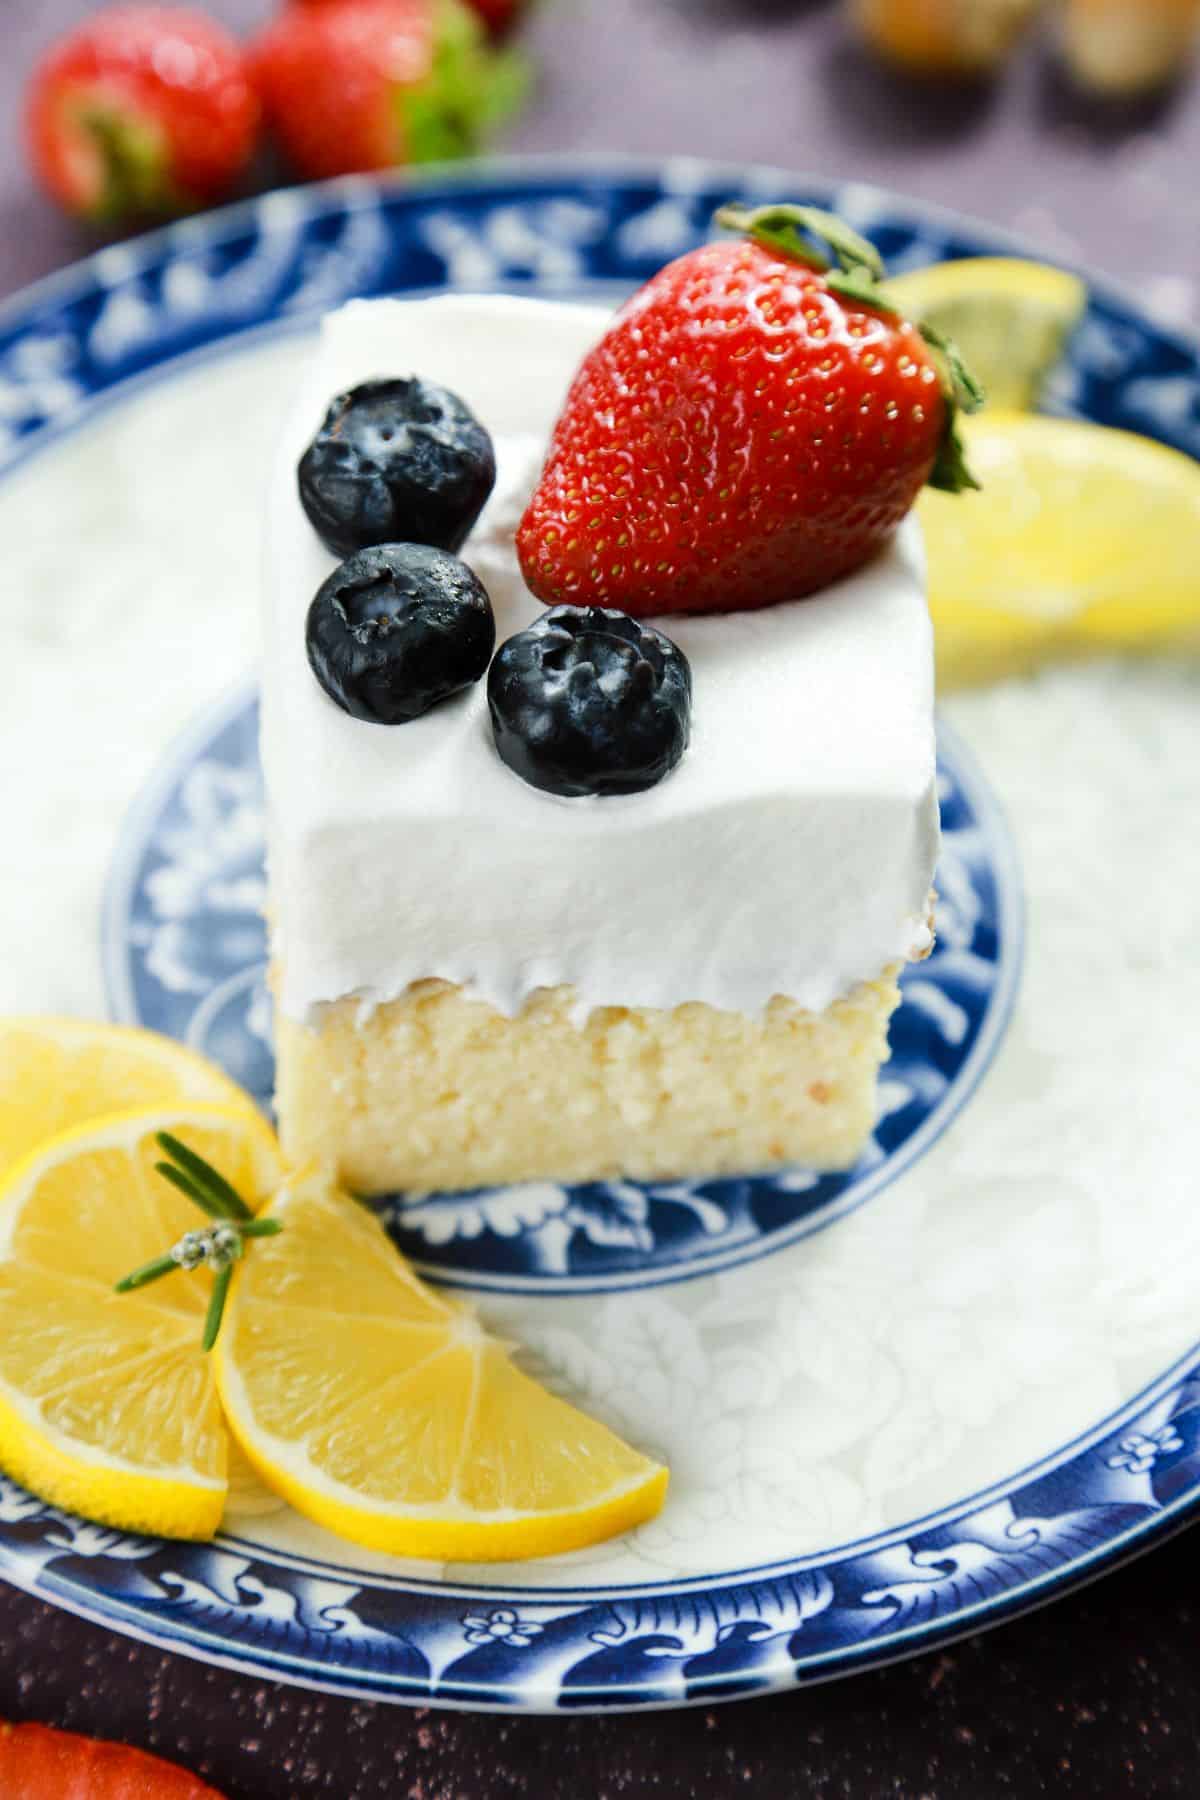 slice of cake topped with berries on white and blue plate